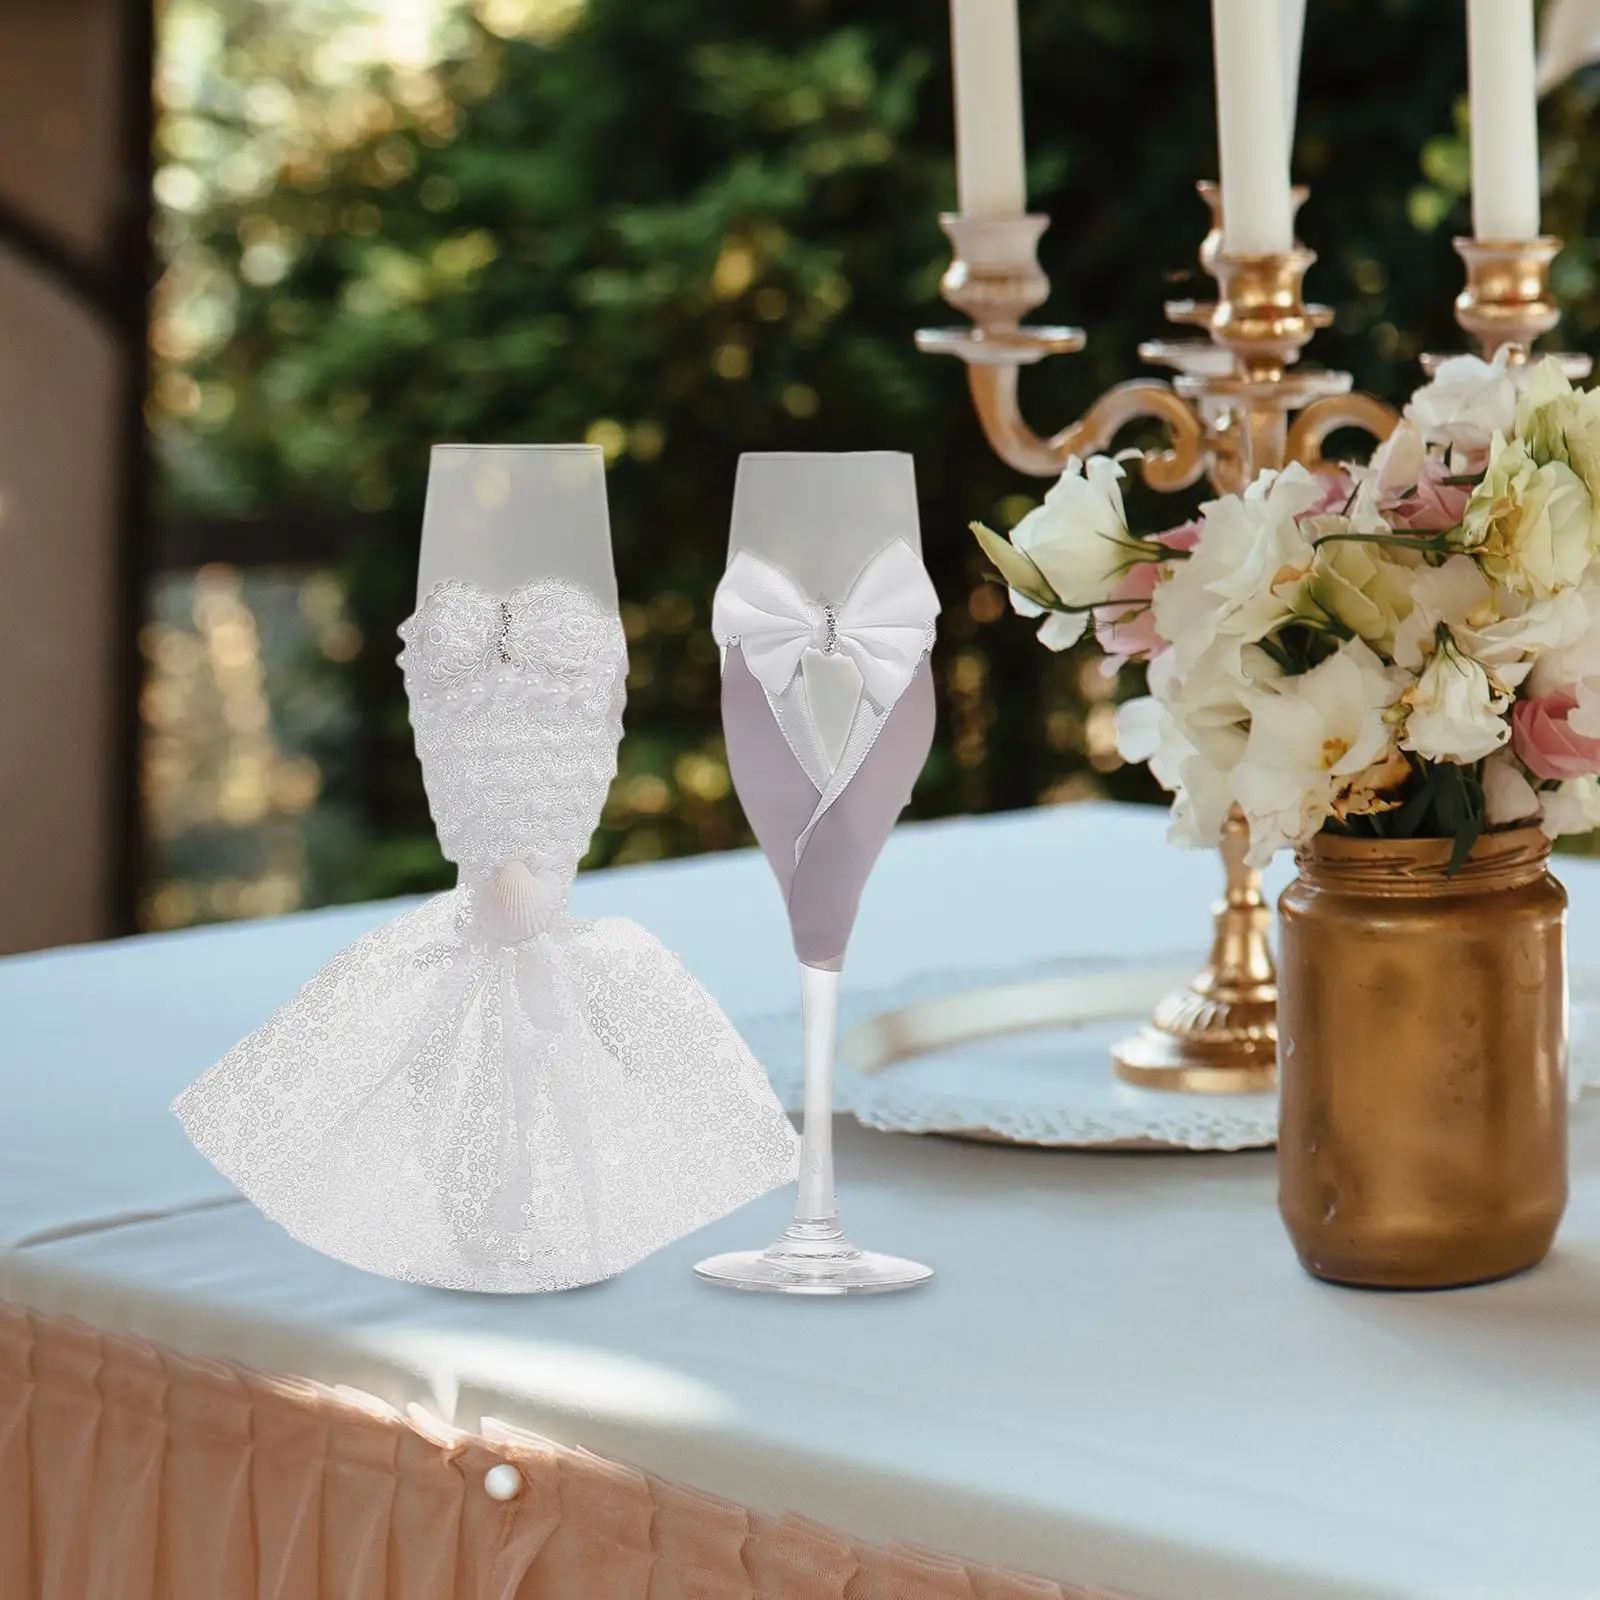 2Pcs Wedding Champagne Glasses Party Accessories Anniversary Decor Creative Romantic Gifts Modern Wedding Champagne Cups